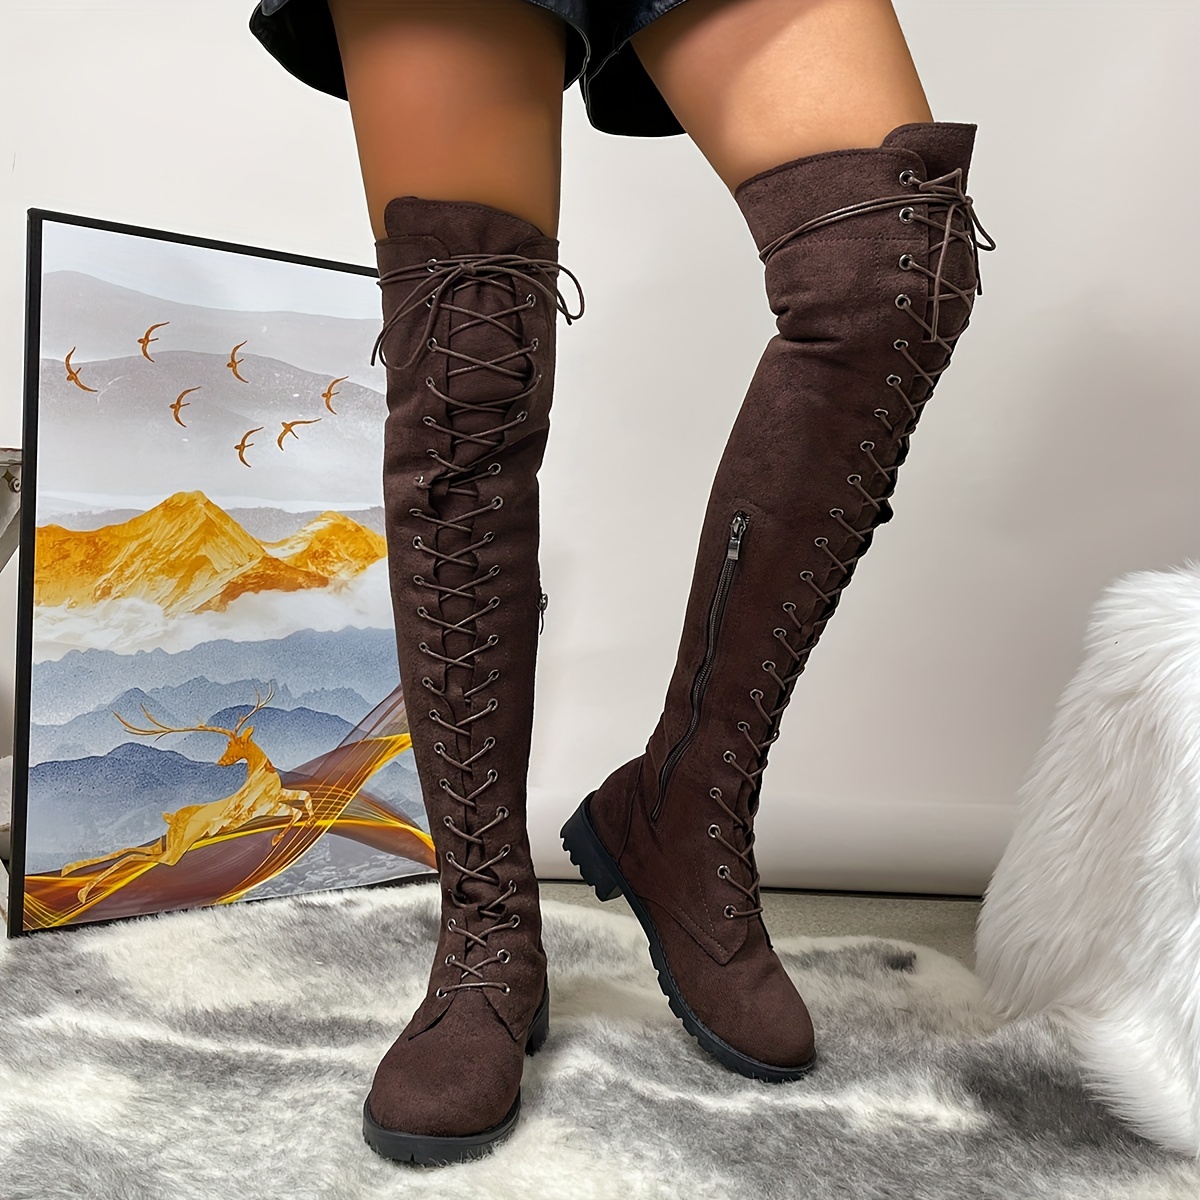 Women's Lace Up Knee High Boots